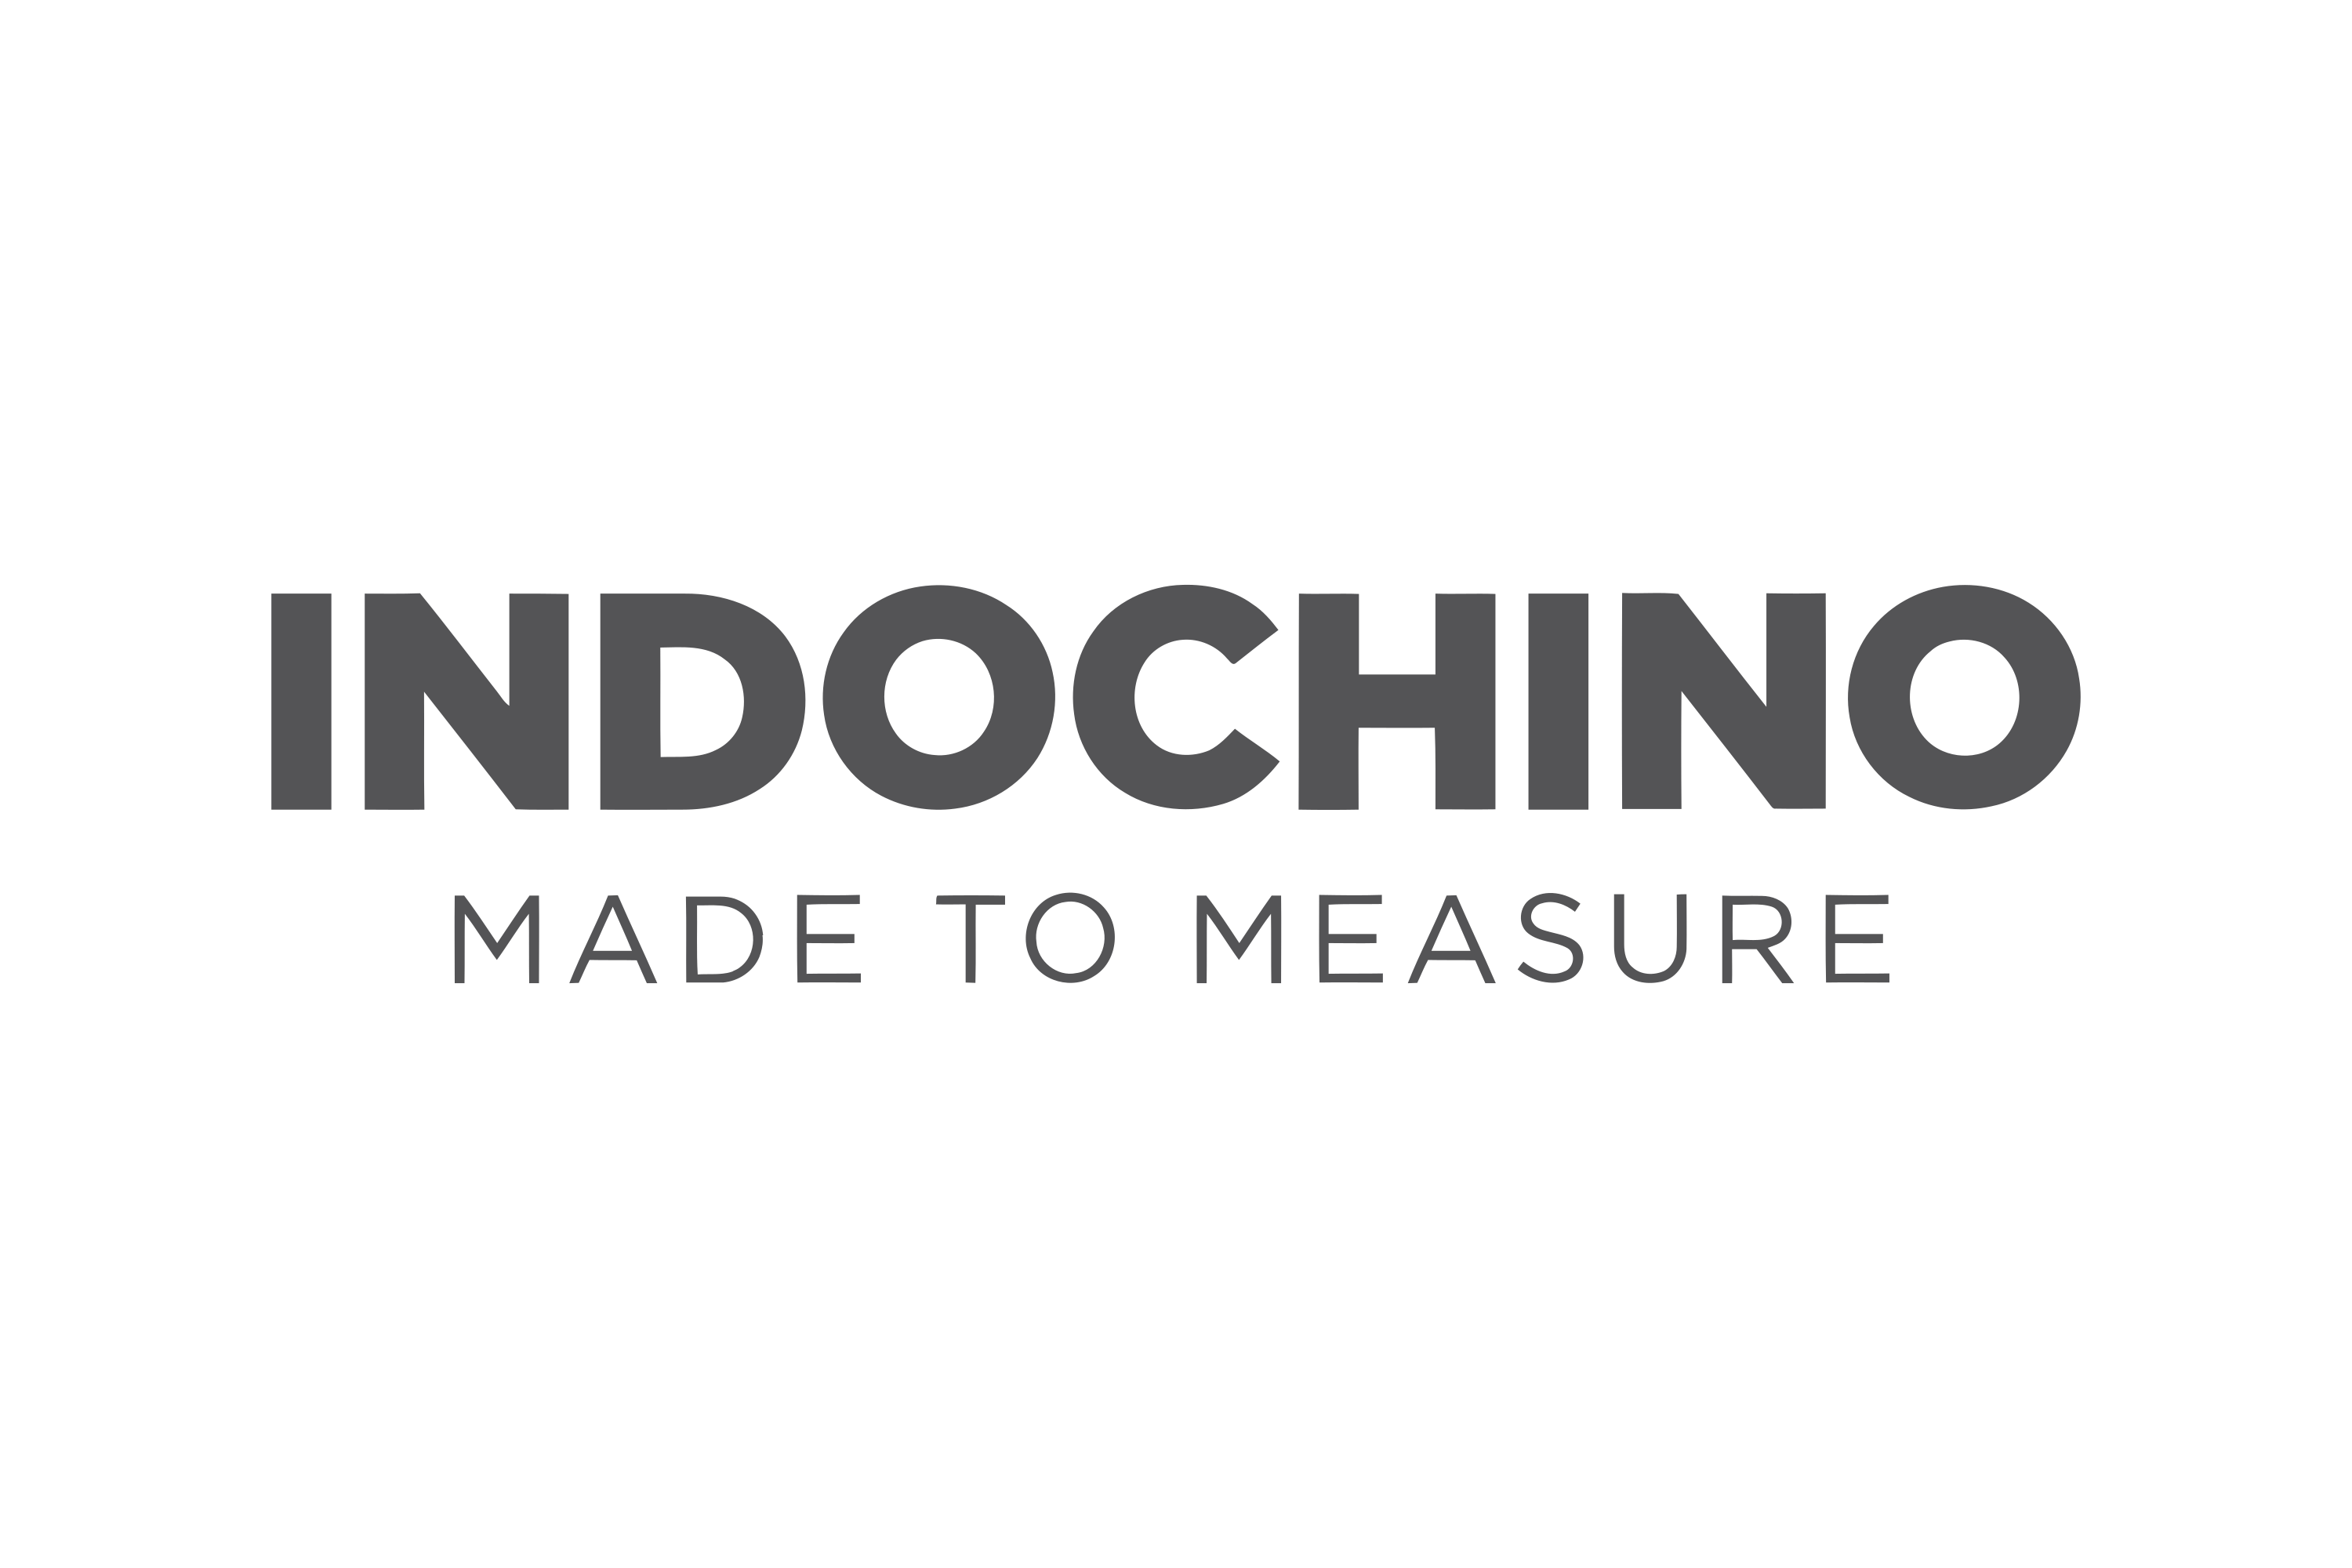 Download Indochino Logo in SVG Vector or PNG File Format 